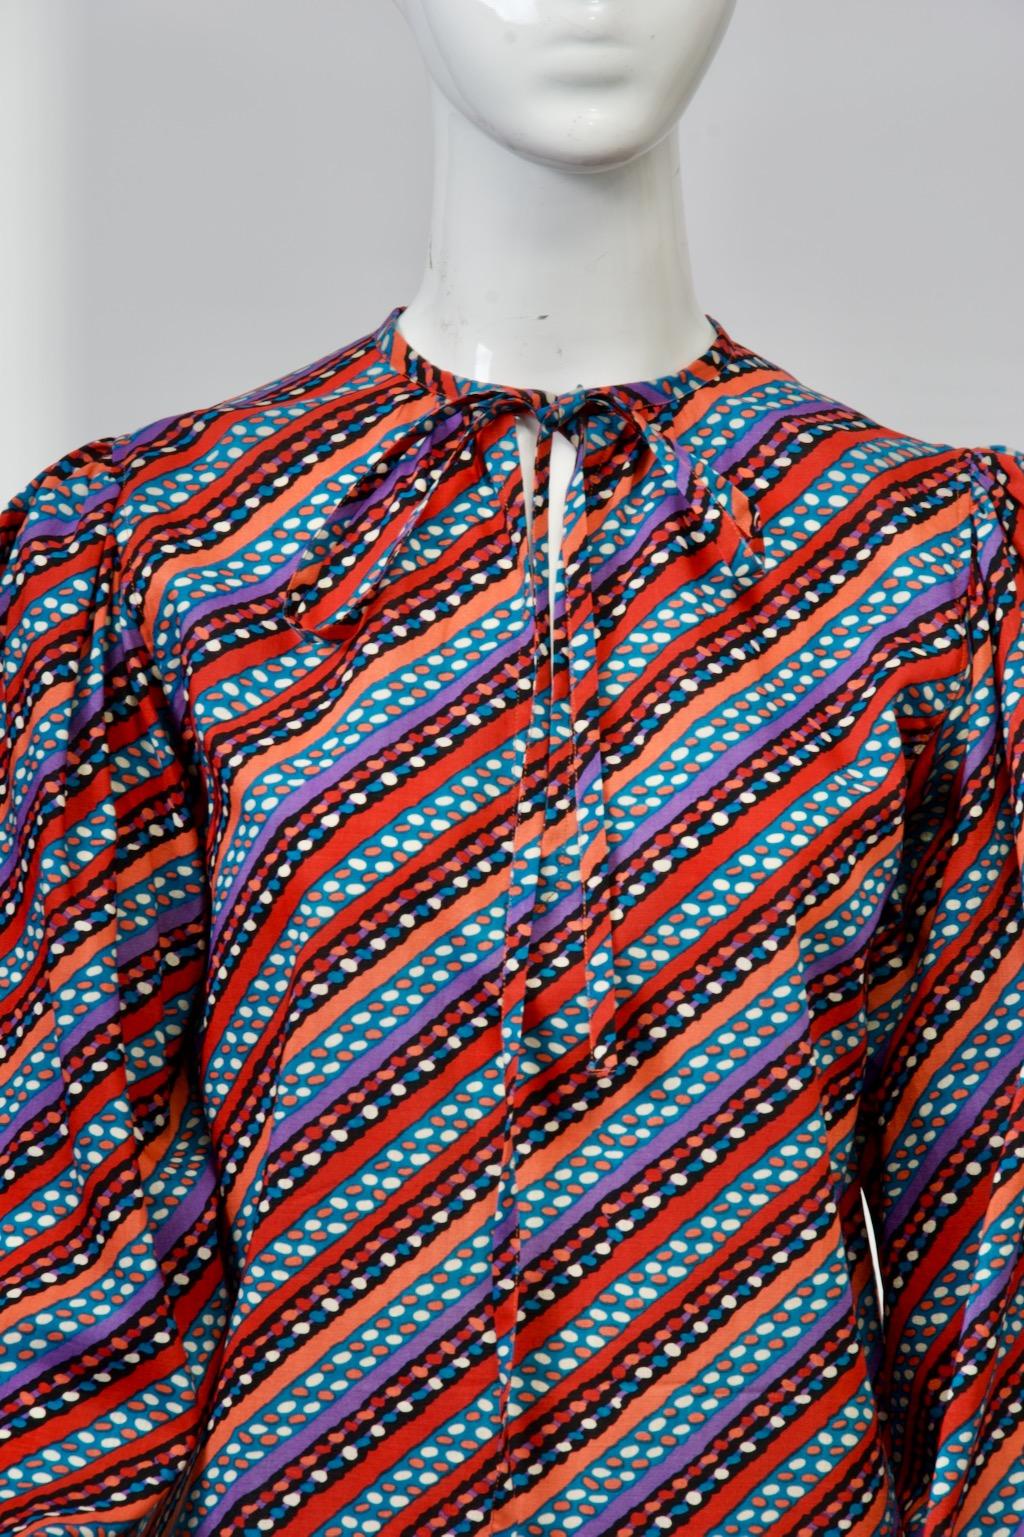 Saint Laurent rive gauche blouse, c. 1970s, crafted of a diagonal print alternating between solid stripes with those containing small ovals, all in multicolors of rust, orange. purple, blue, black, and white. The blouse has a straight cut and